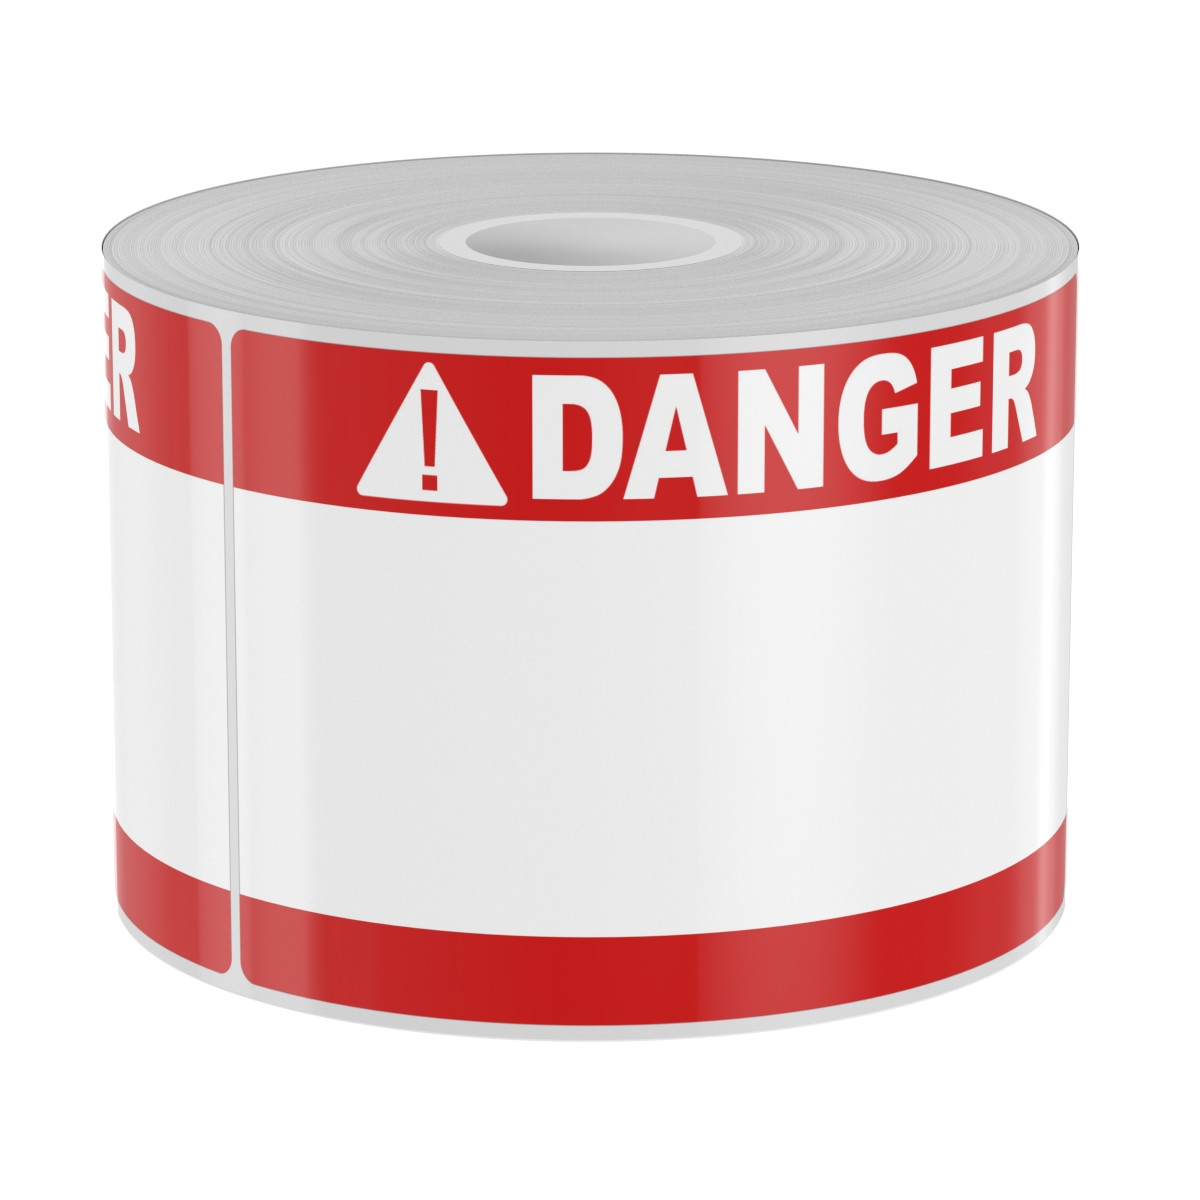 Ask a question about 250 3" x 5" High-Performance Die-Cut Red Double Band White Danger